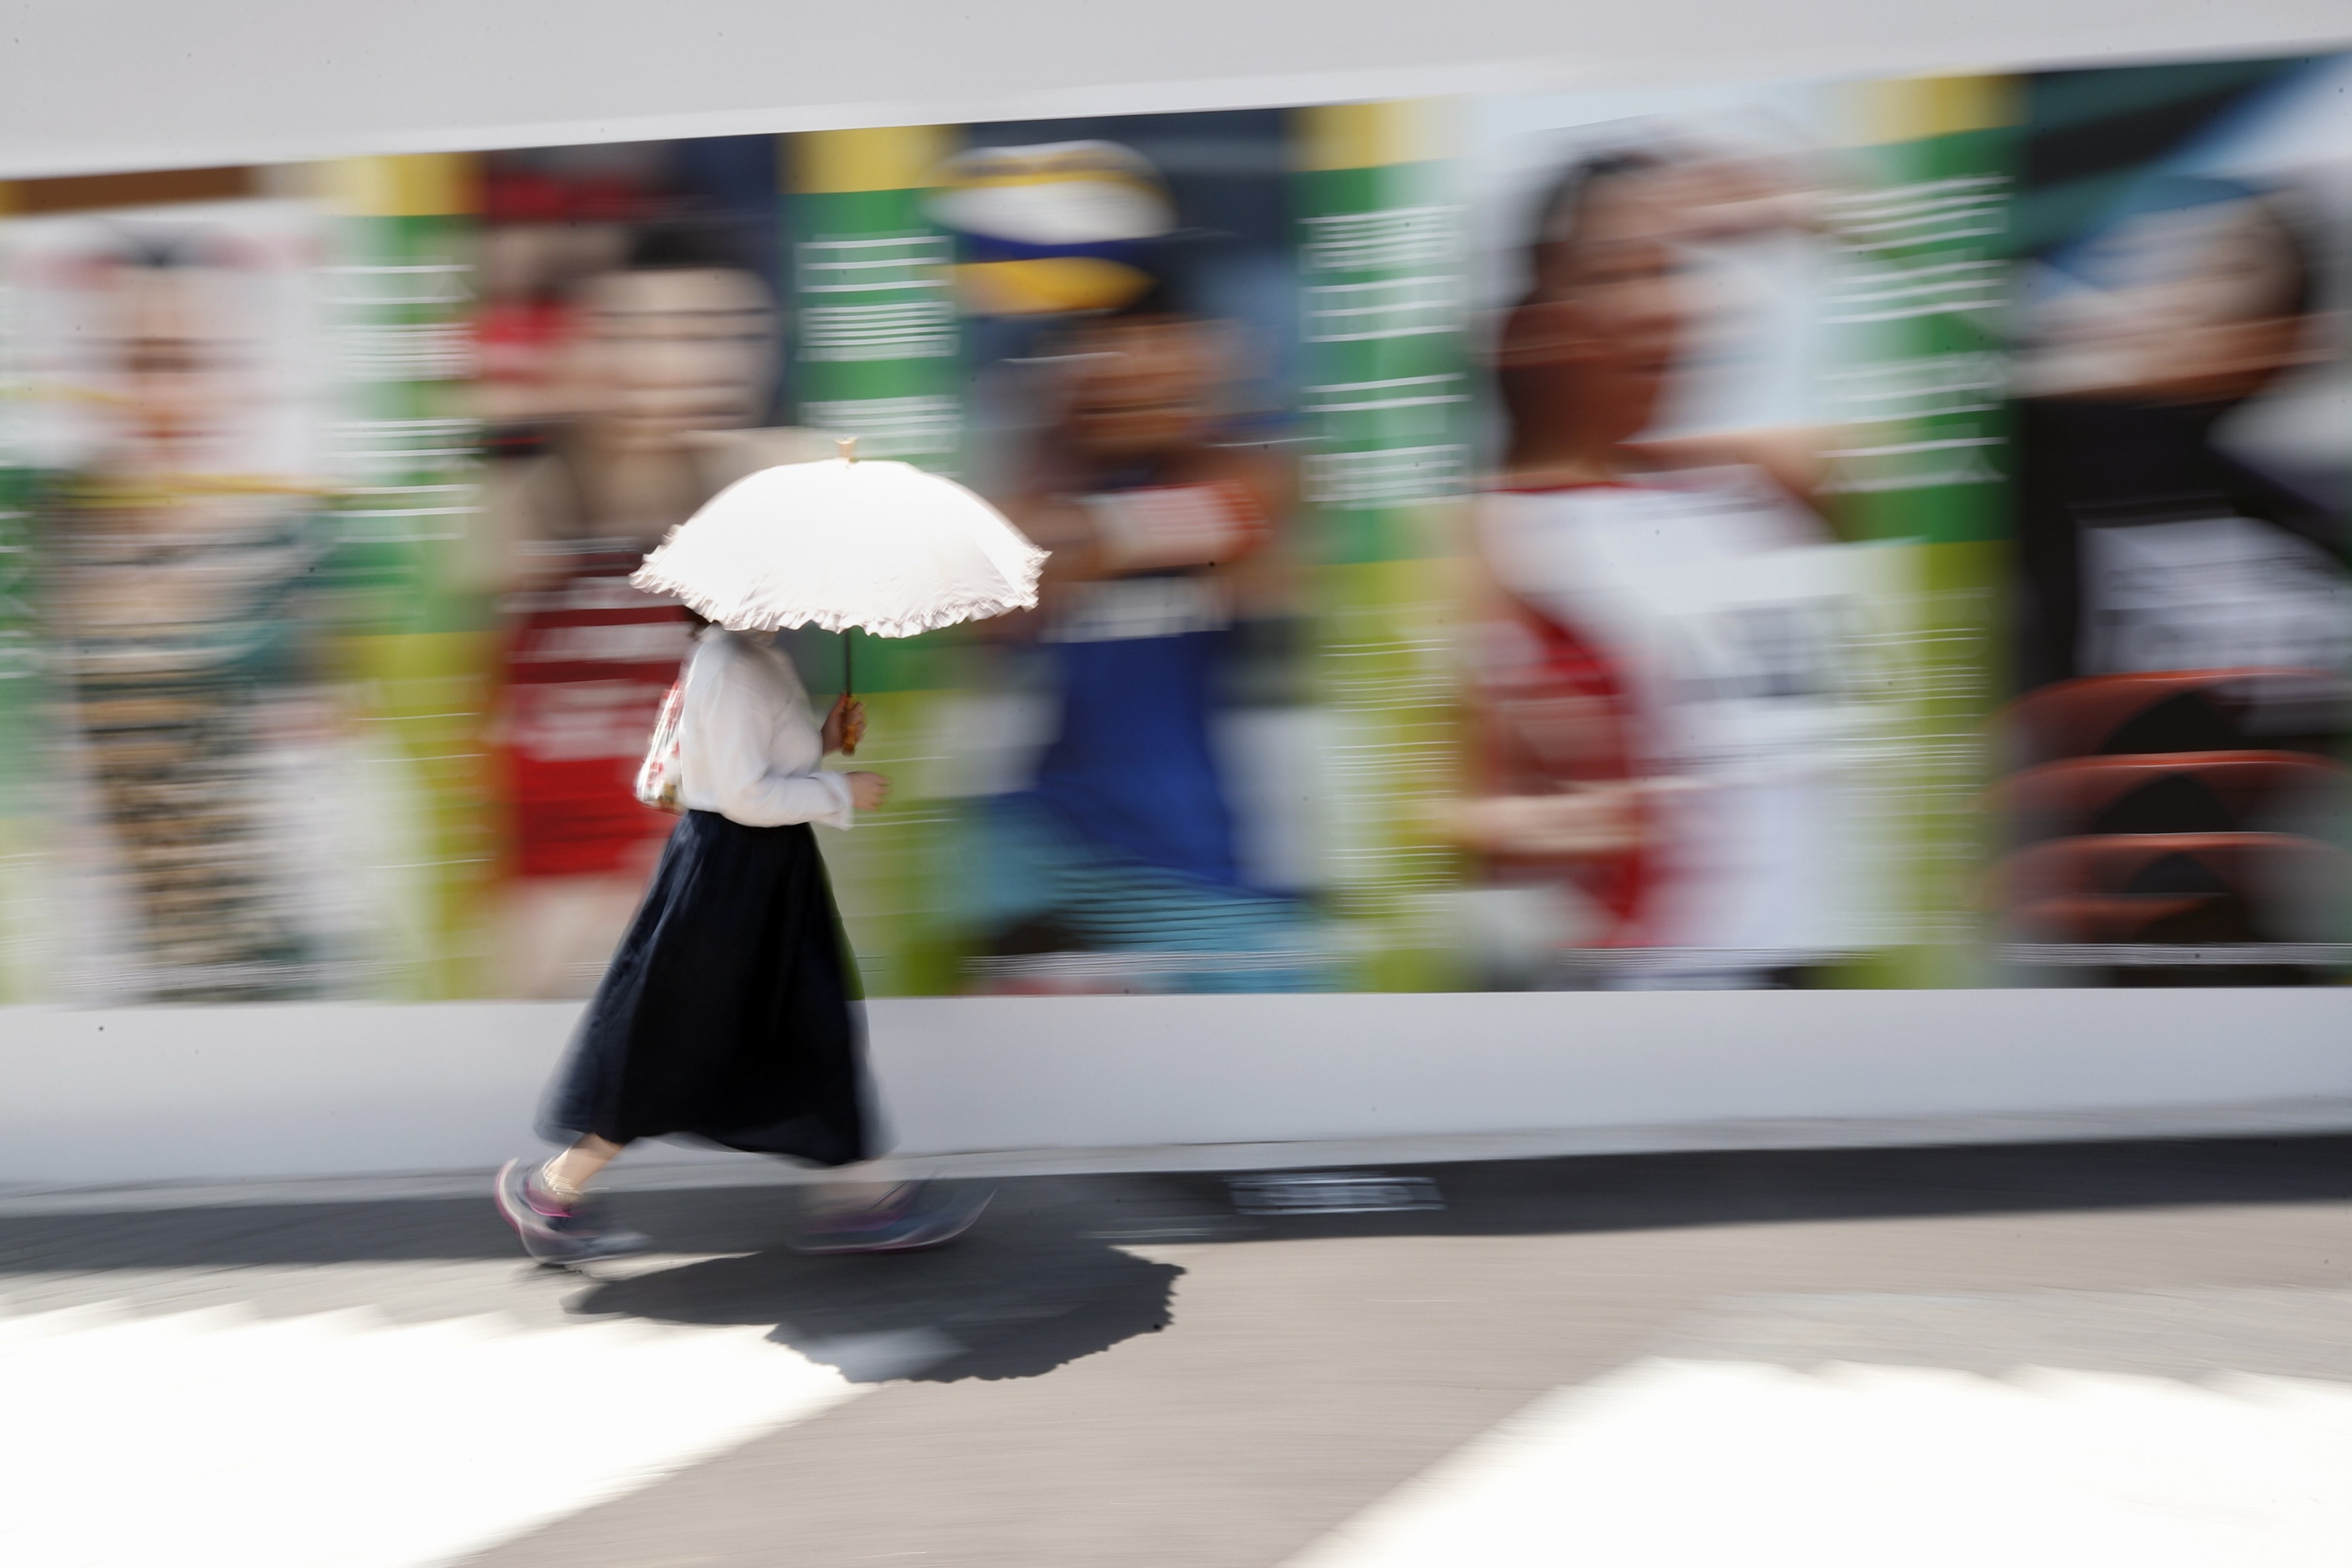 A pedestrian walks past a billboard featuring Japanese athletes to promote the Tokyo 2020 Olympics, in Tokyo on July 20. Photo: EPA-EFE